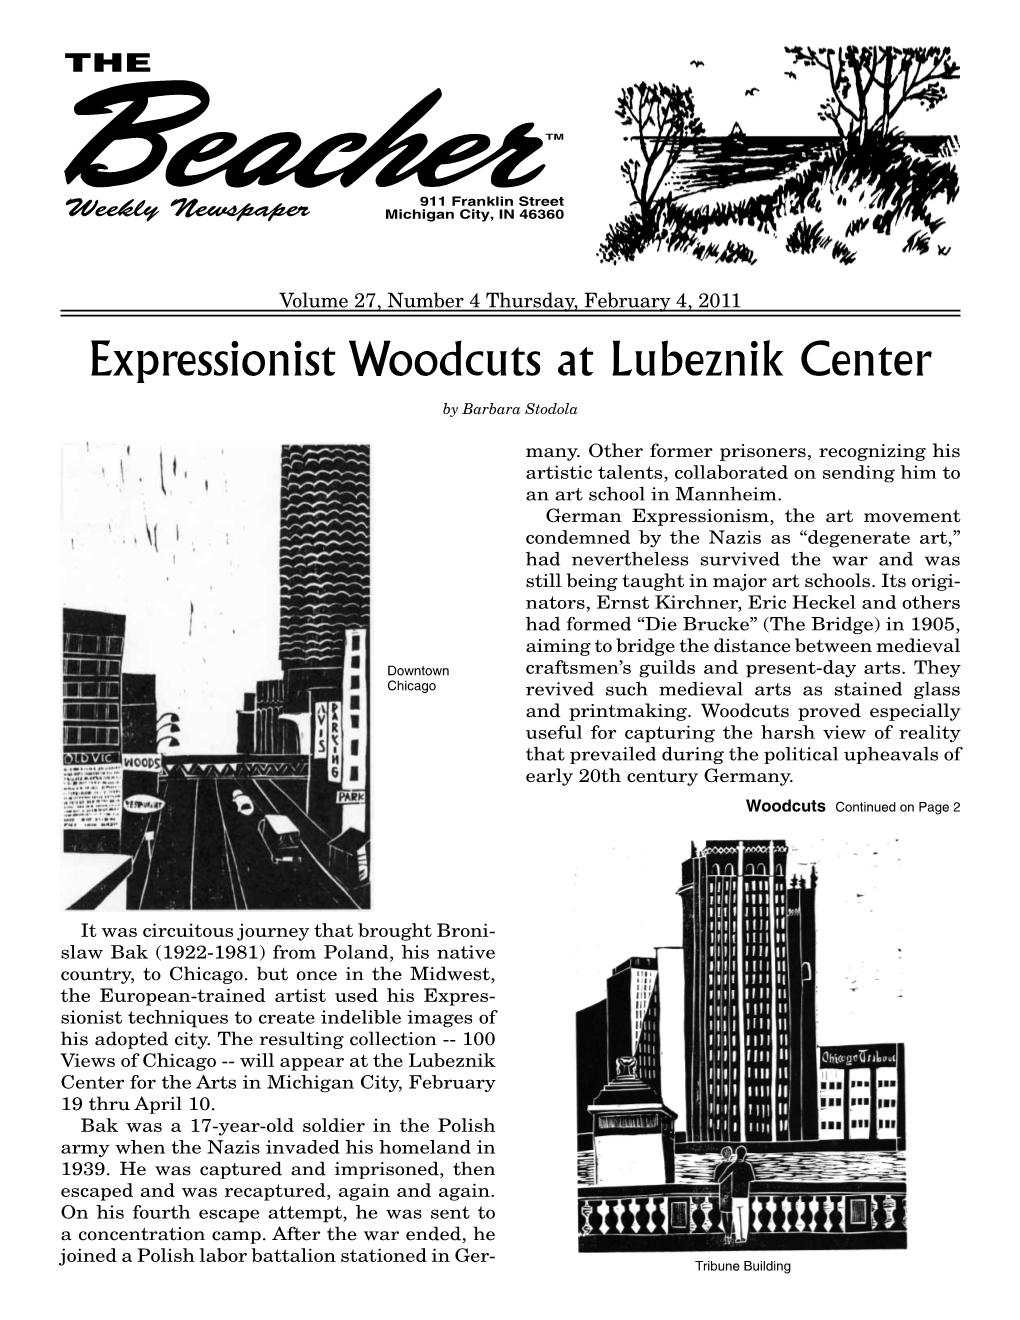 Expressionist Woodcuts at Lubeznik Center